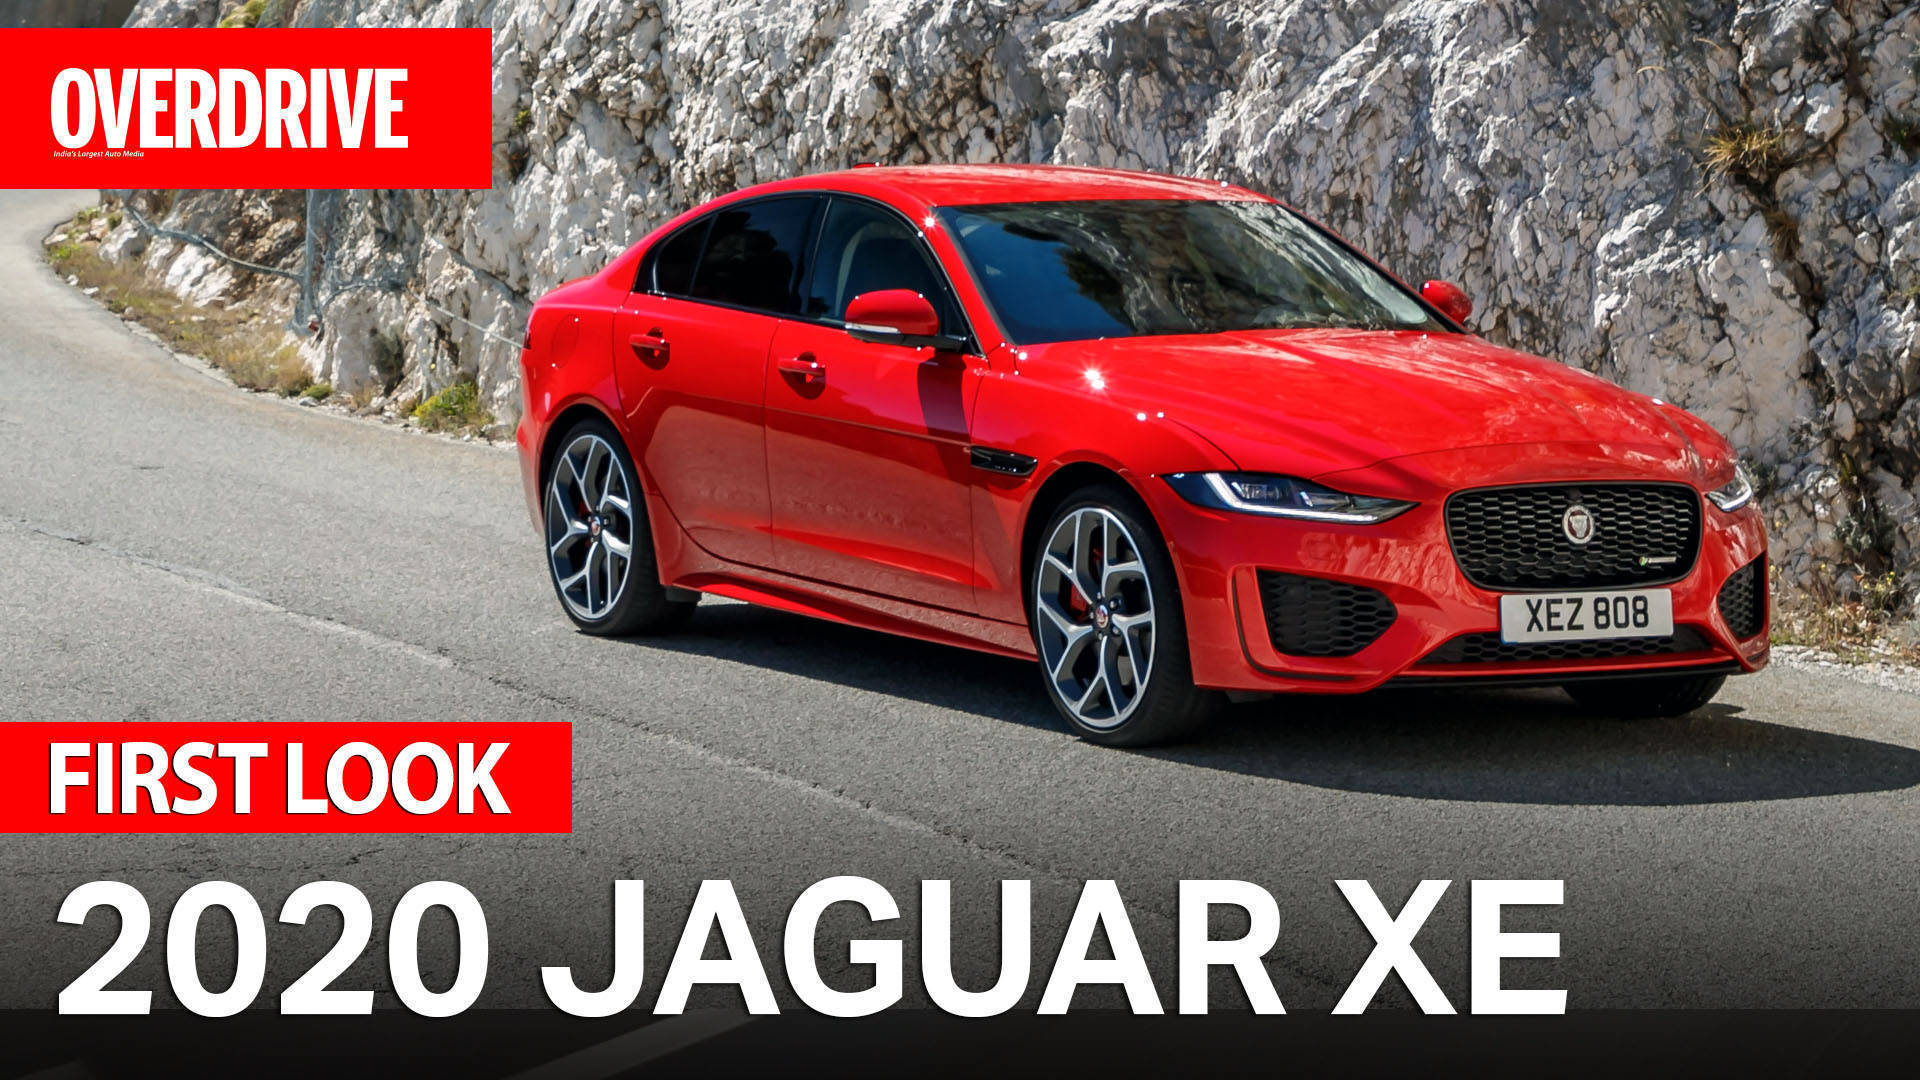 2020 Jaguar XE | Design, features, specifications and price